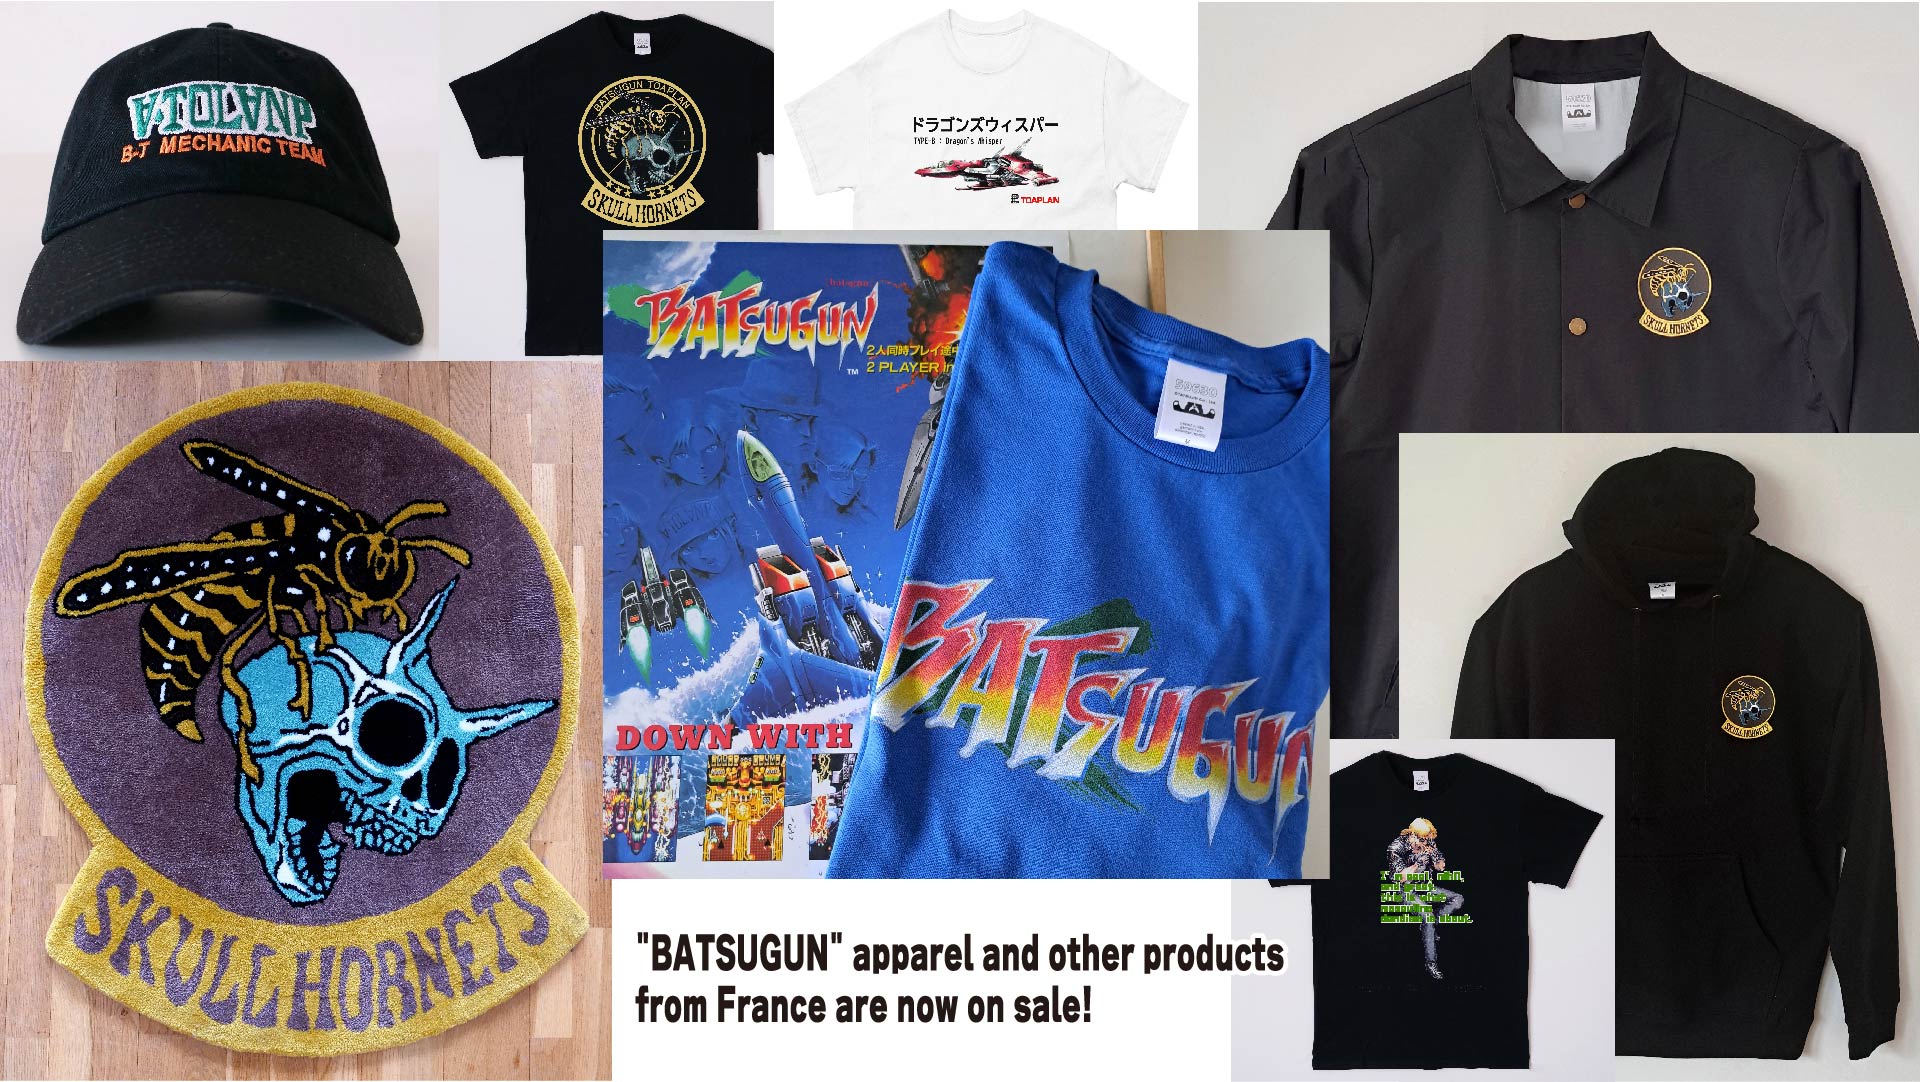 "BATSUGUN" apparel and other products from France are now on sale!